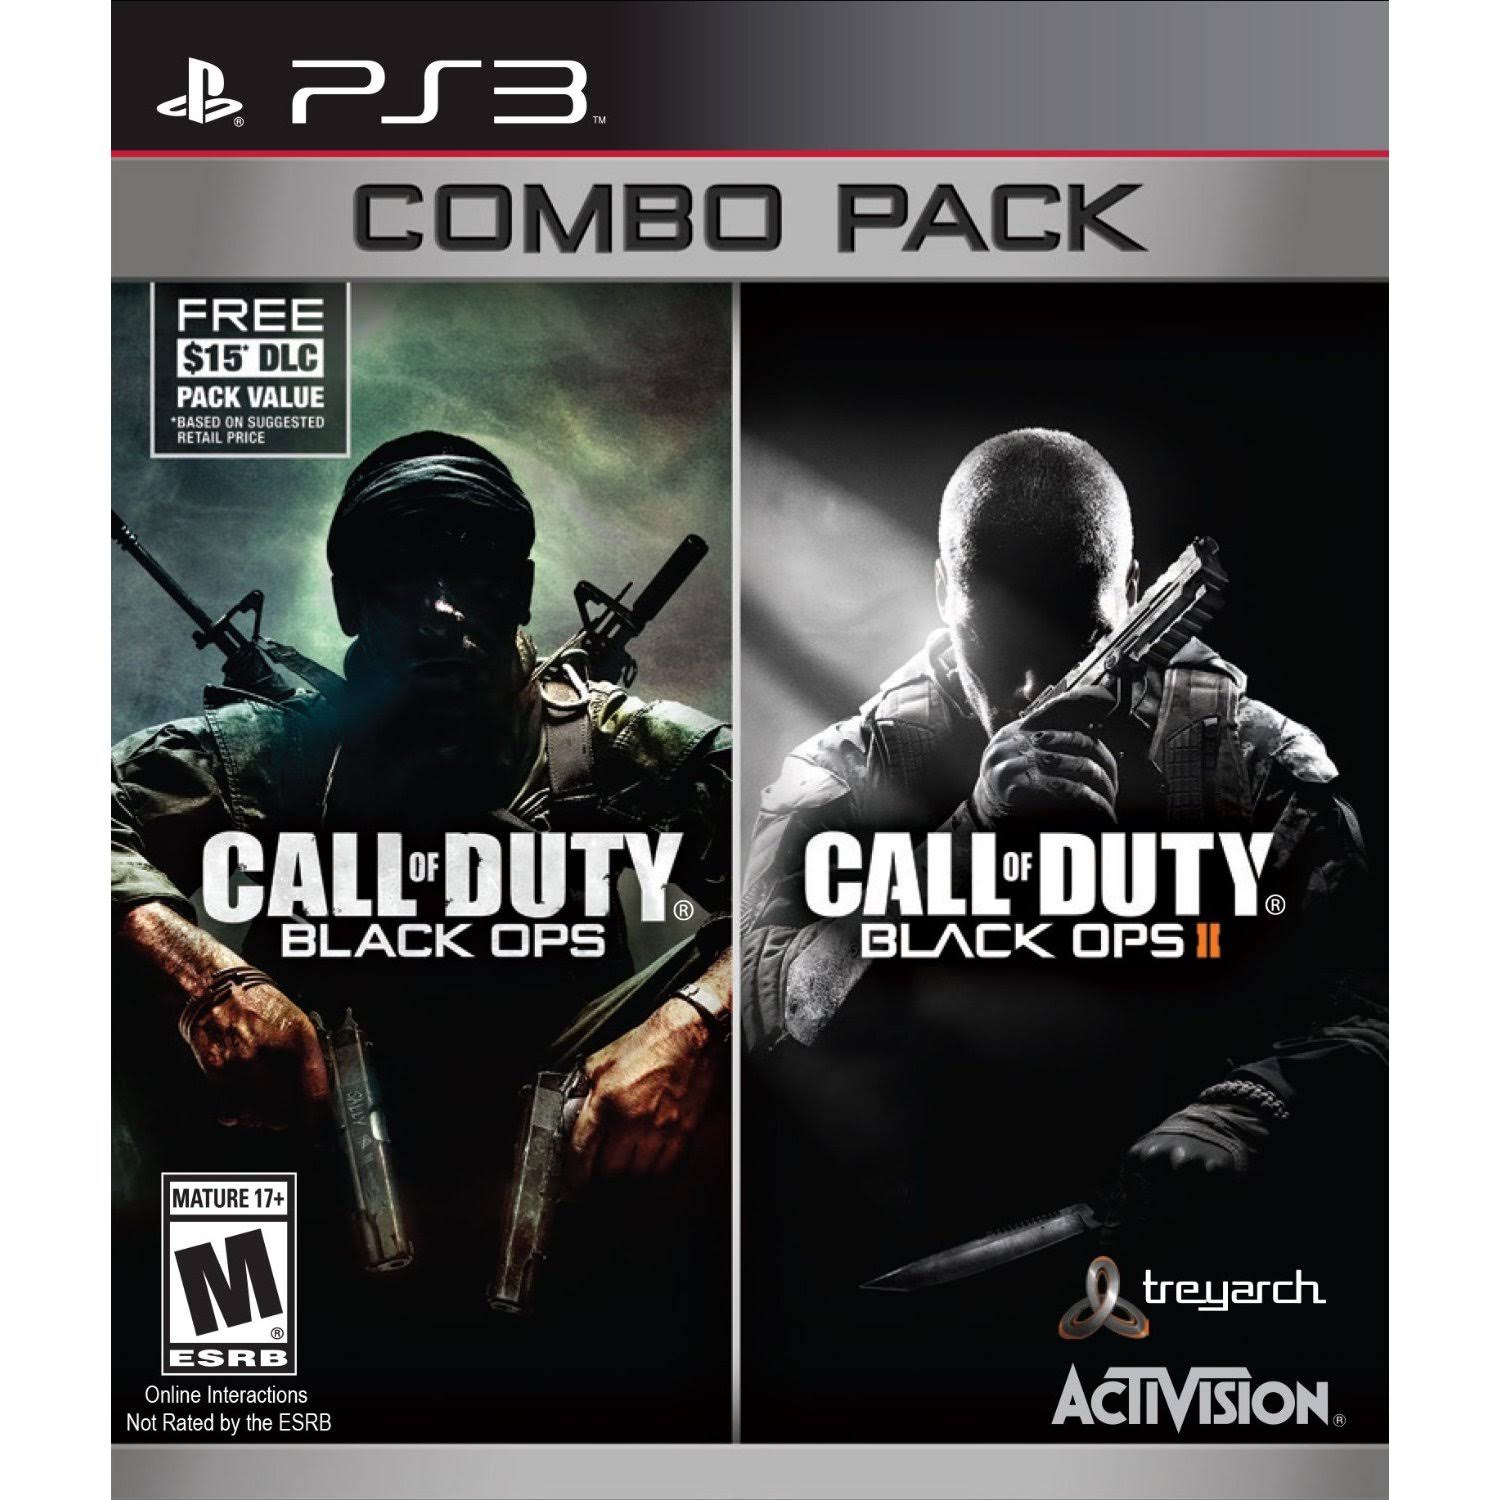 Call of Duty: Black Ops Combo Pack - PlayStation 3